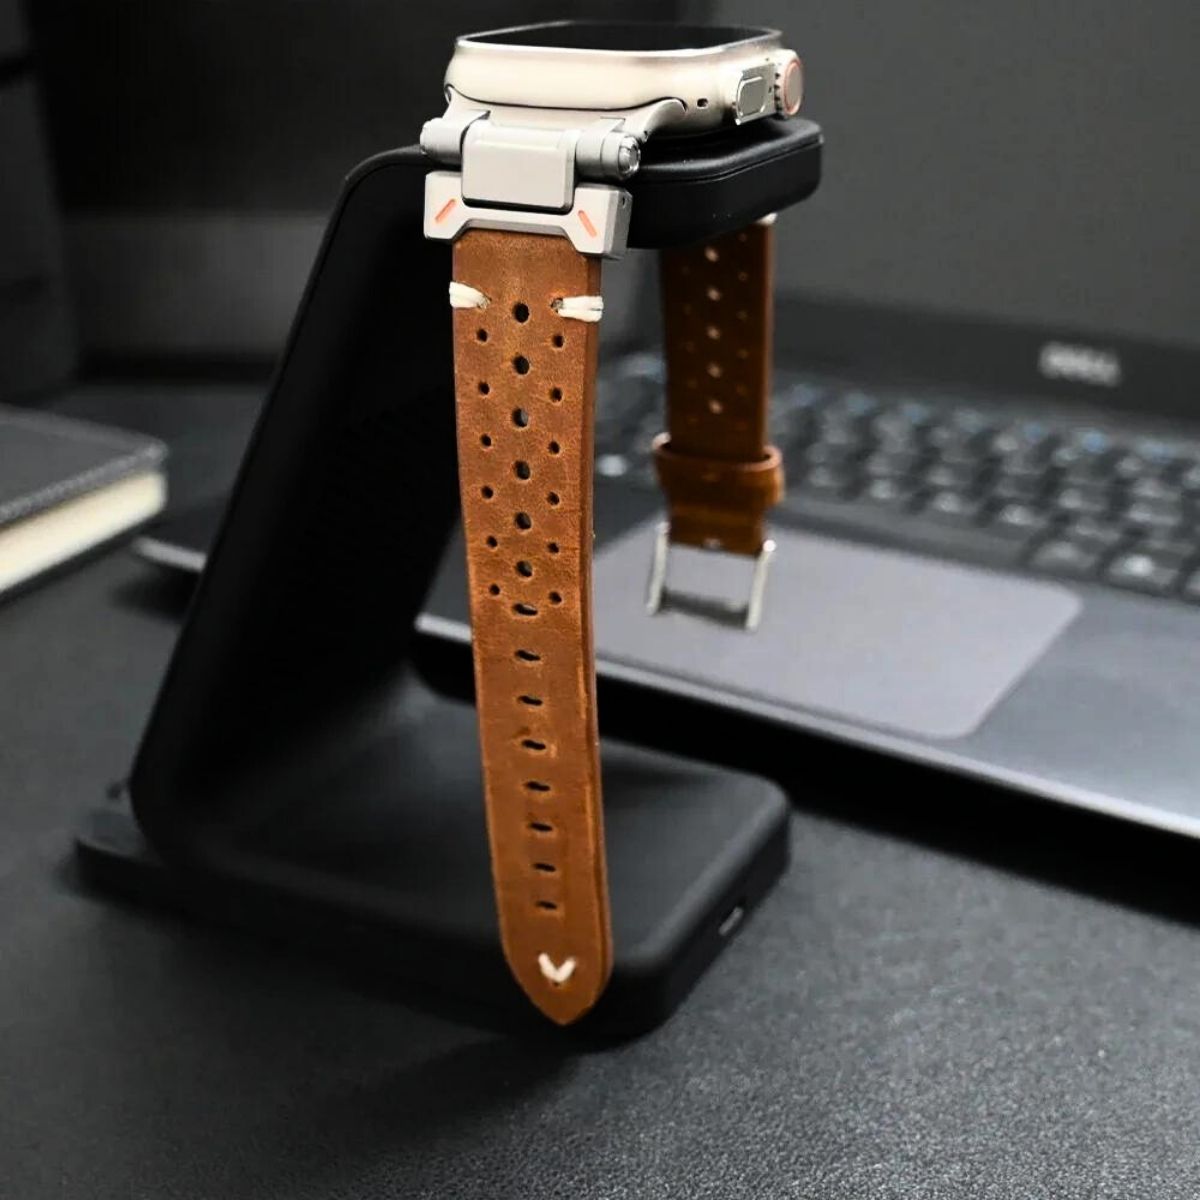 Classic Genuine Leather Apple Watch Band with Metal Buckle